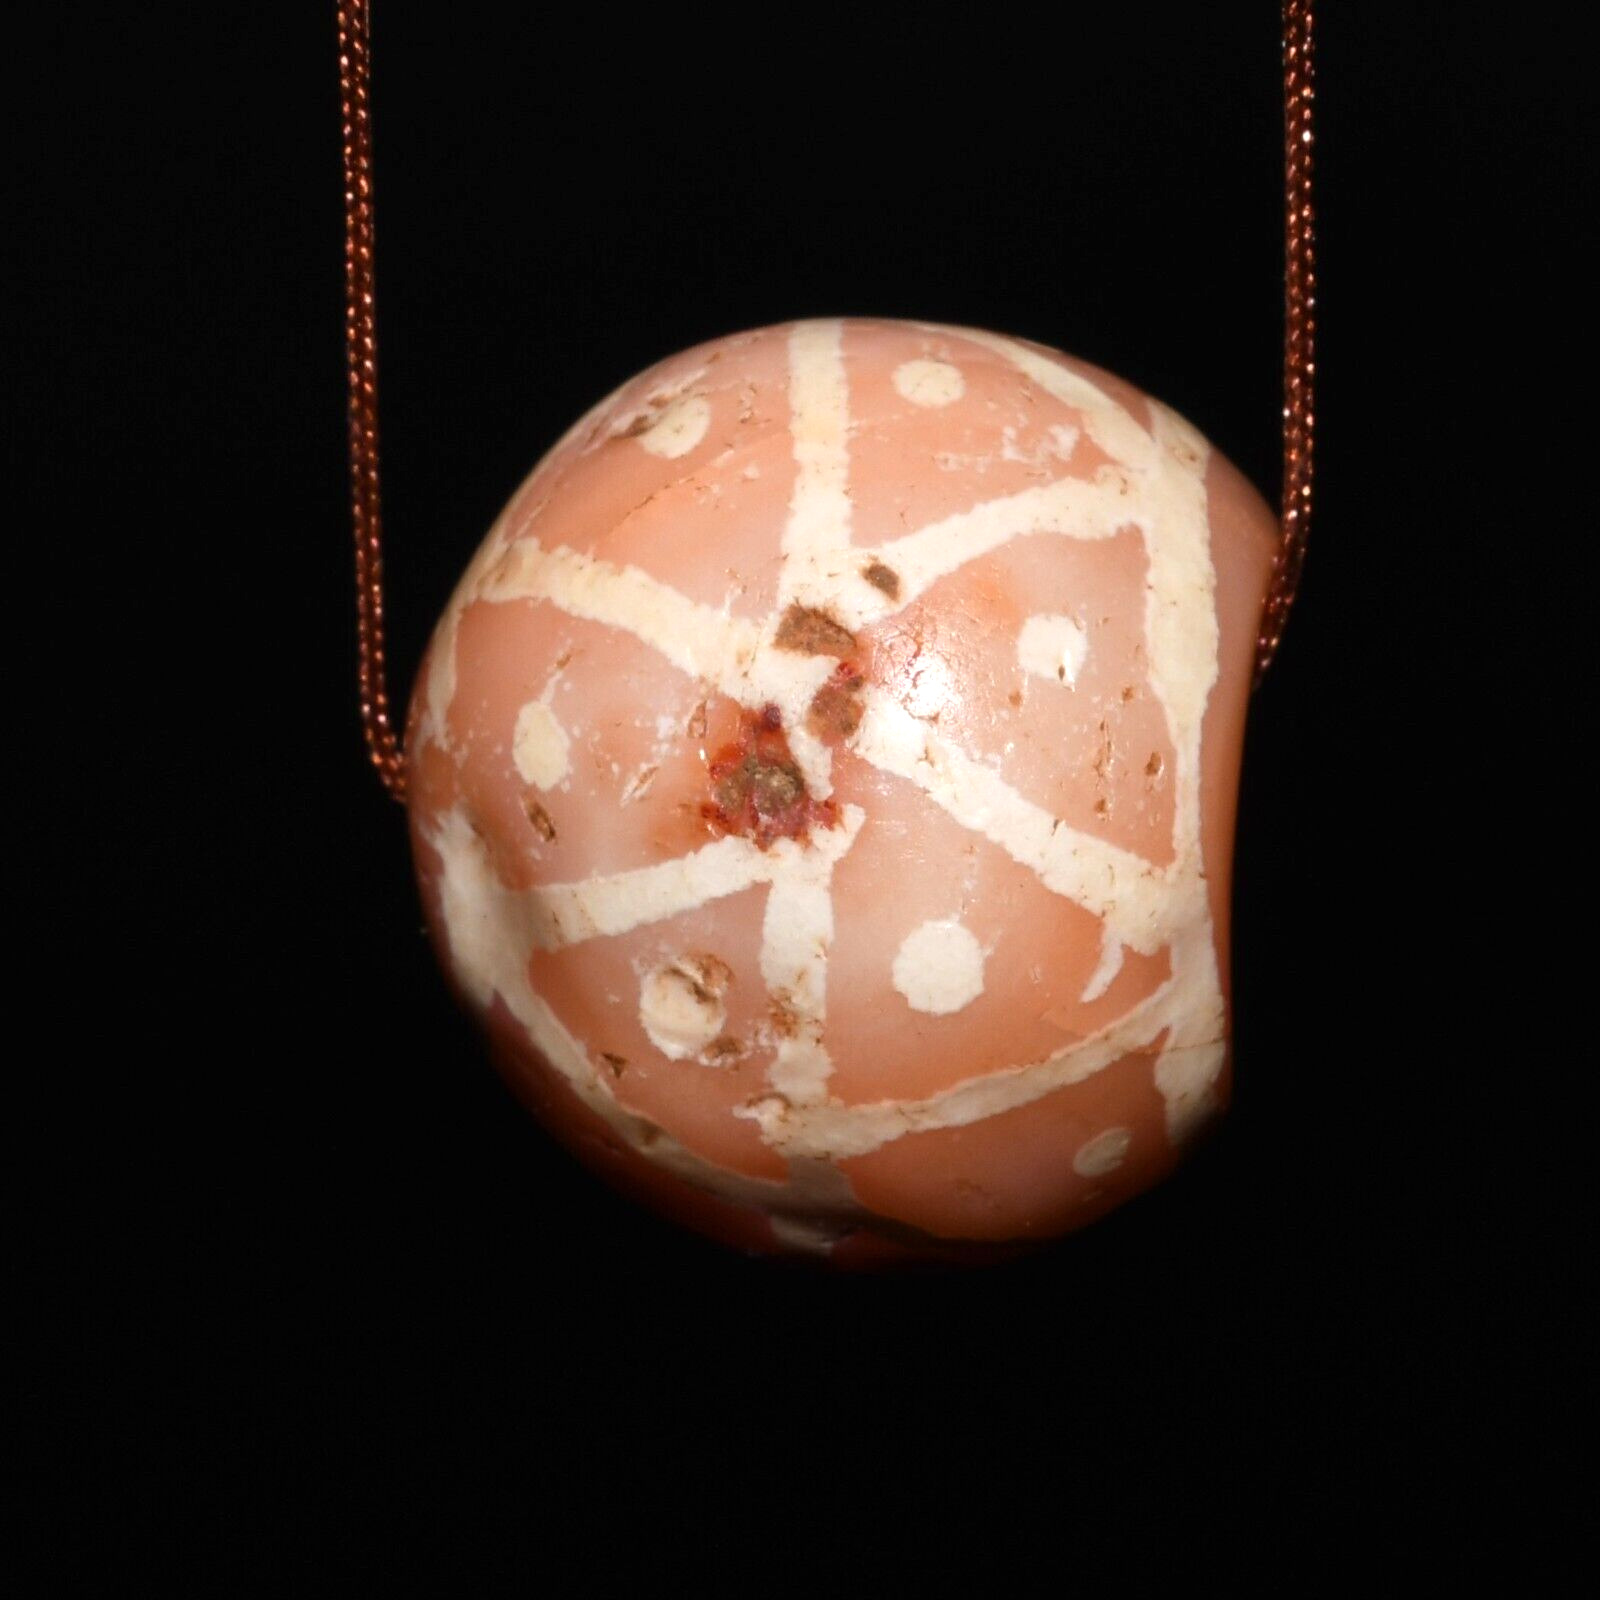 Ancient Round Etched Carnelian Bead in Excellent Condition Over 1500 Years Old